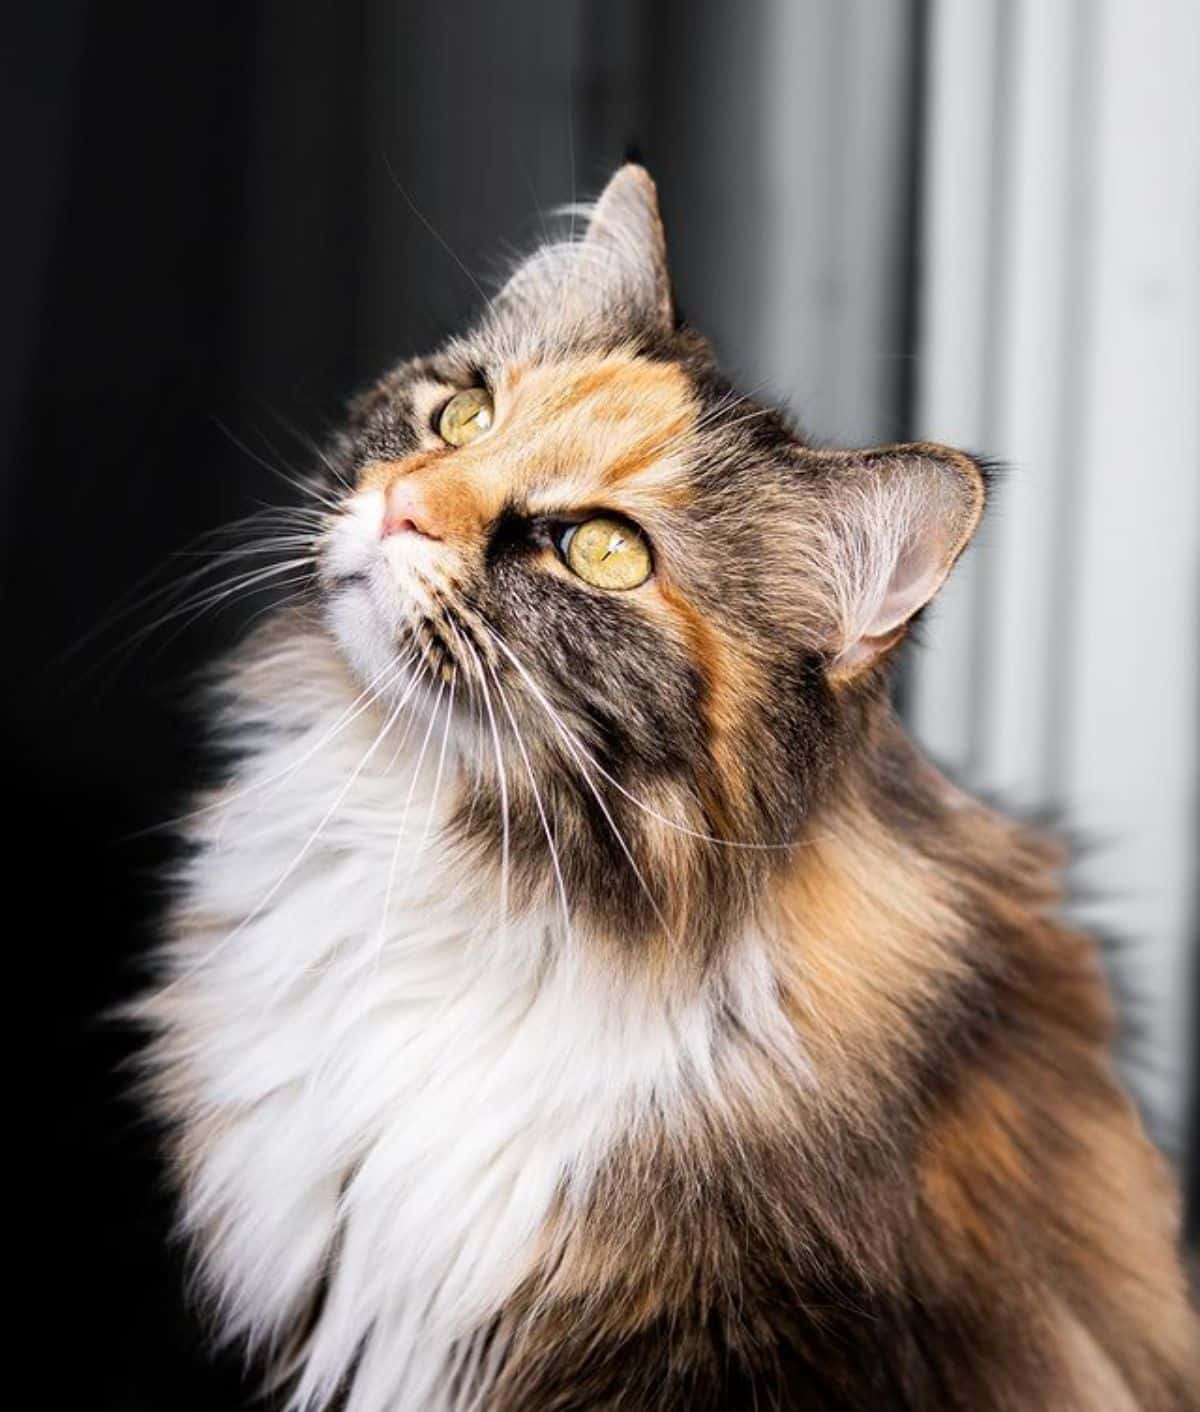 A cute fluffy calico maine coon starring upwards.